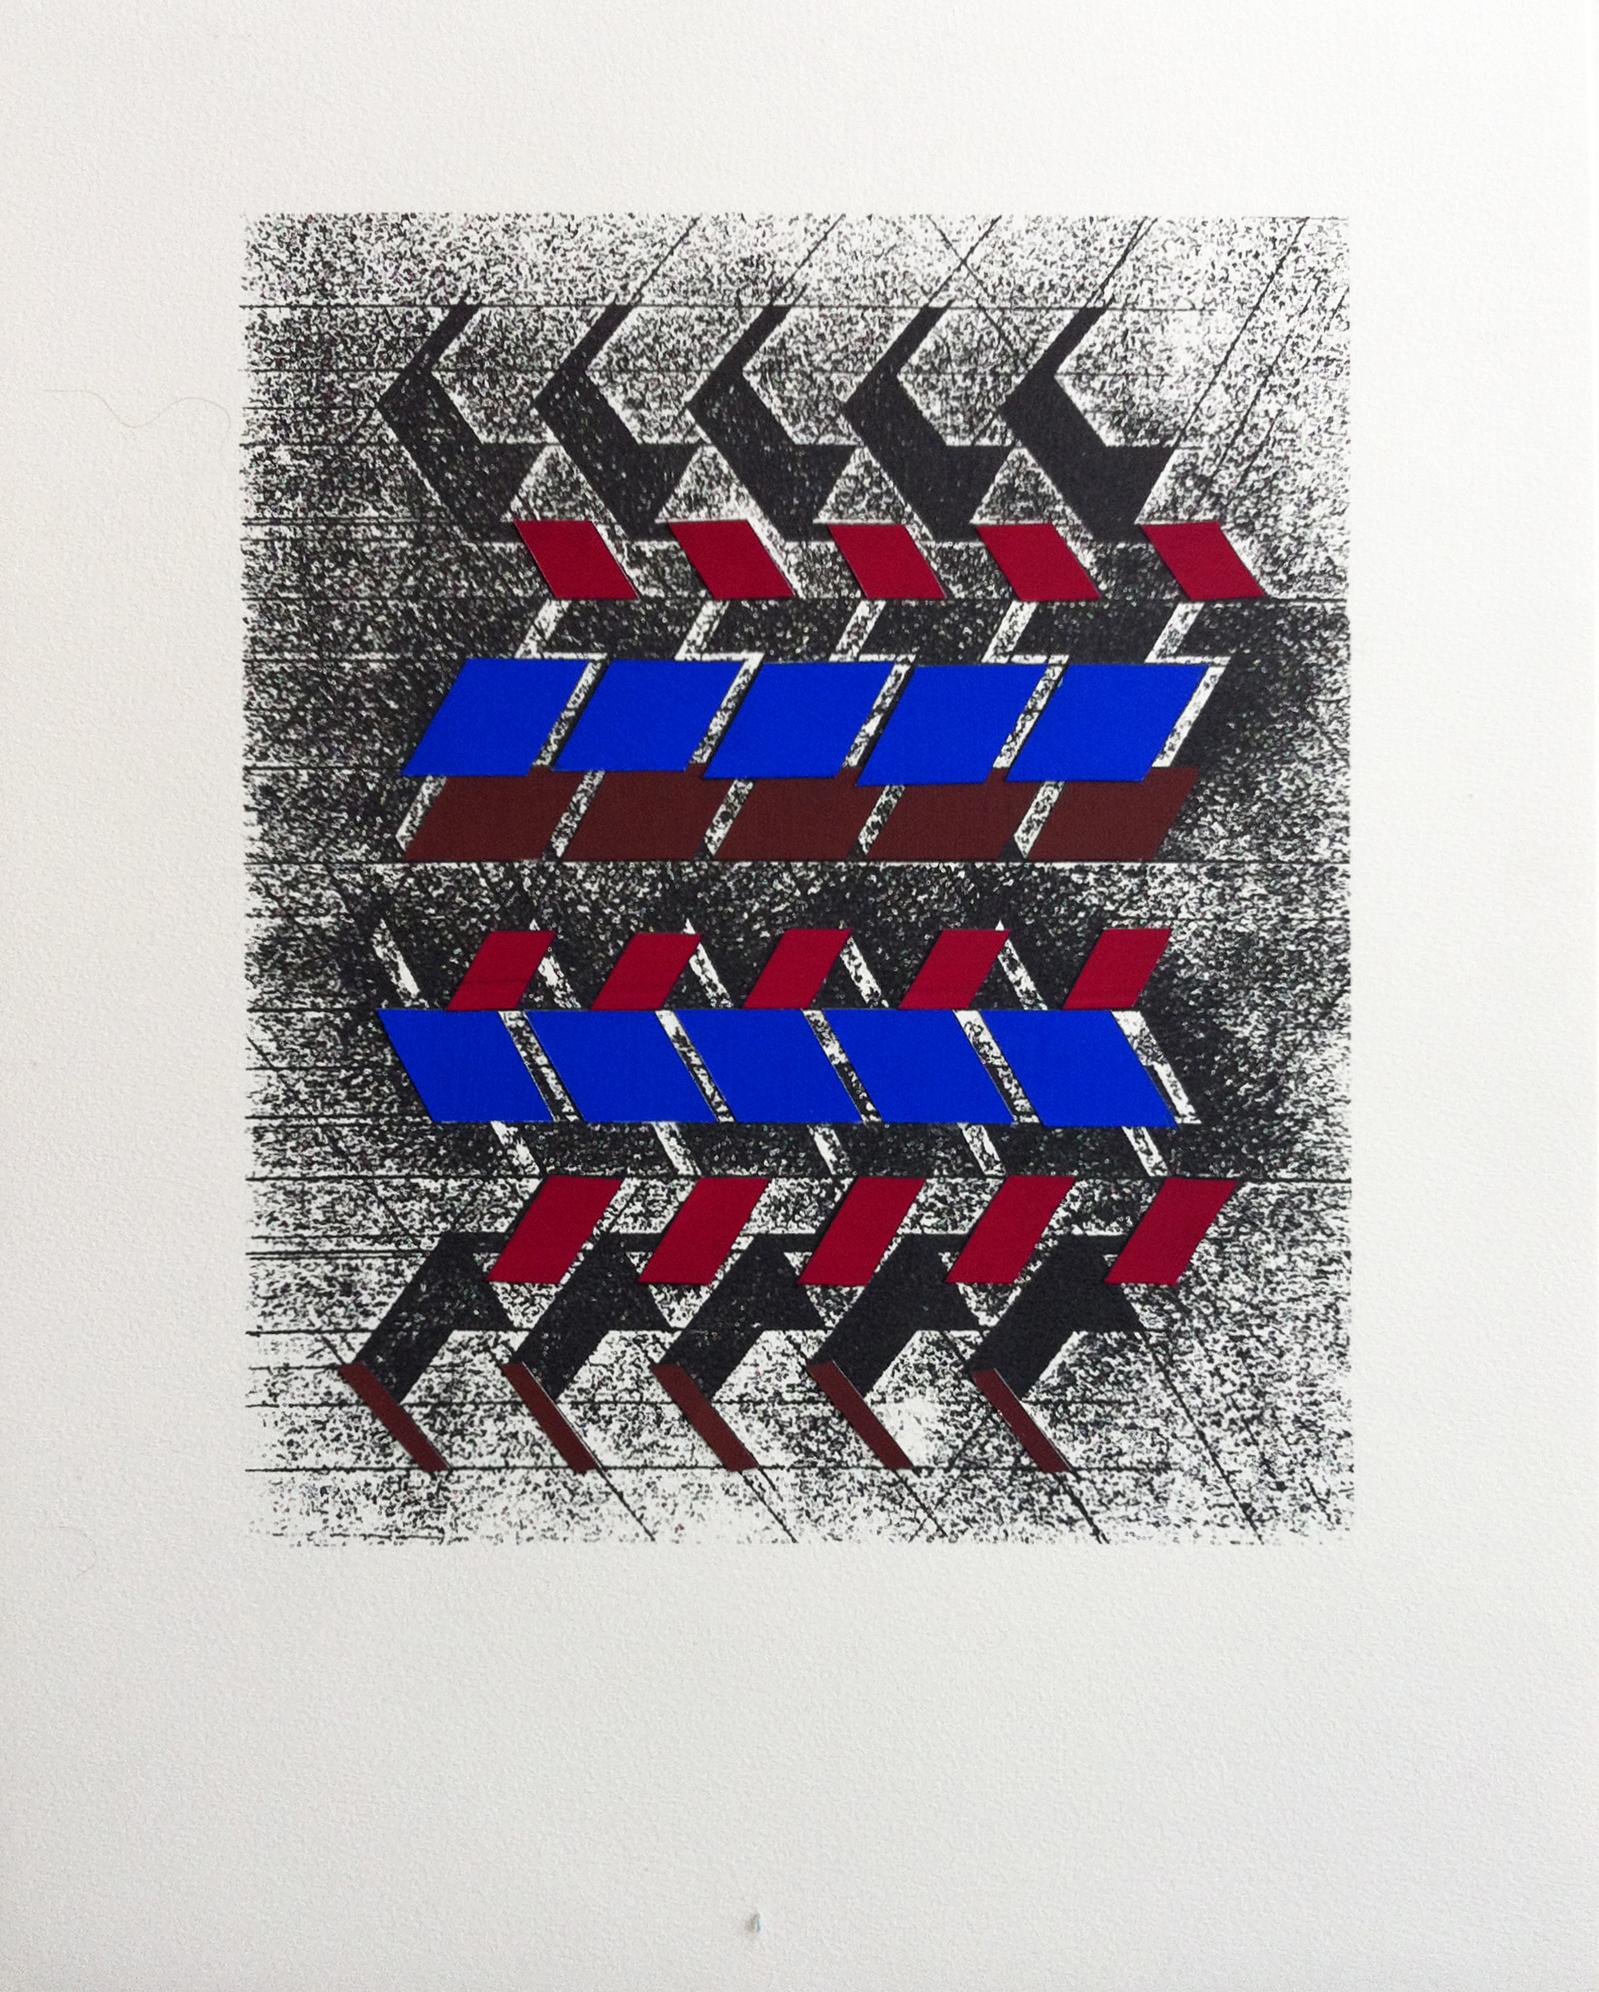 Michel Deverne Landscape Painting - Kinetic Modern Abstract Painting Geometric Paper Collage on Silkscreen "Rythmes"